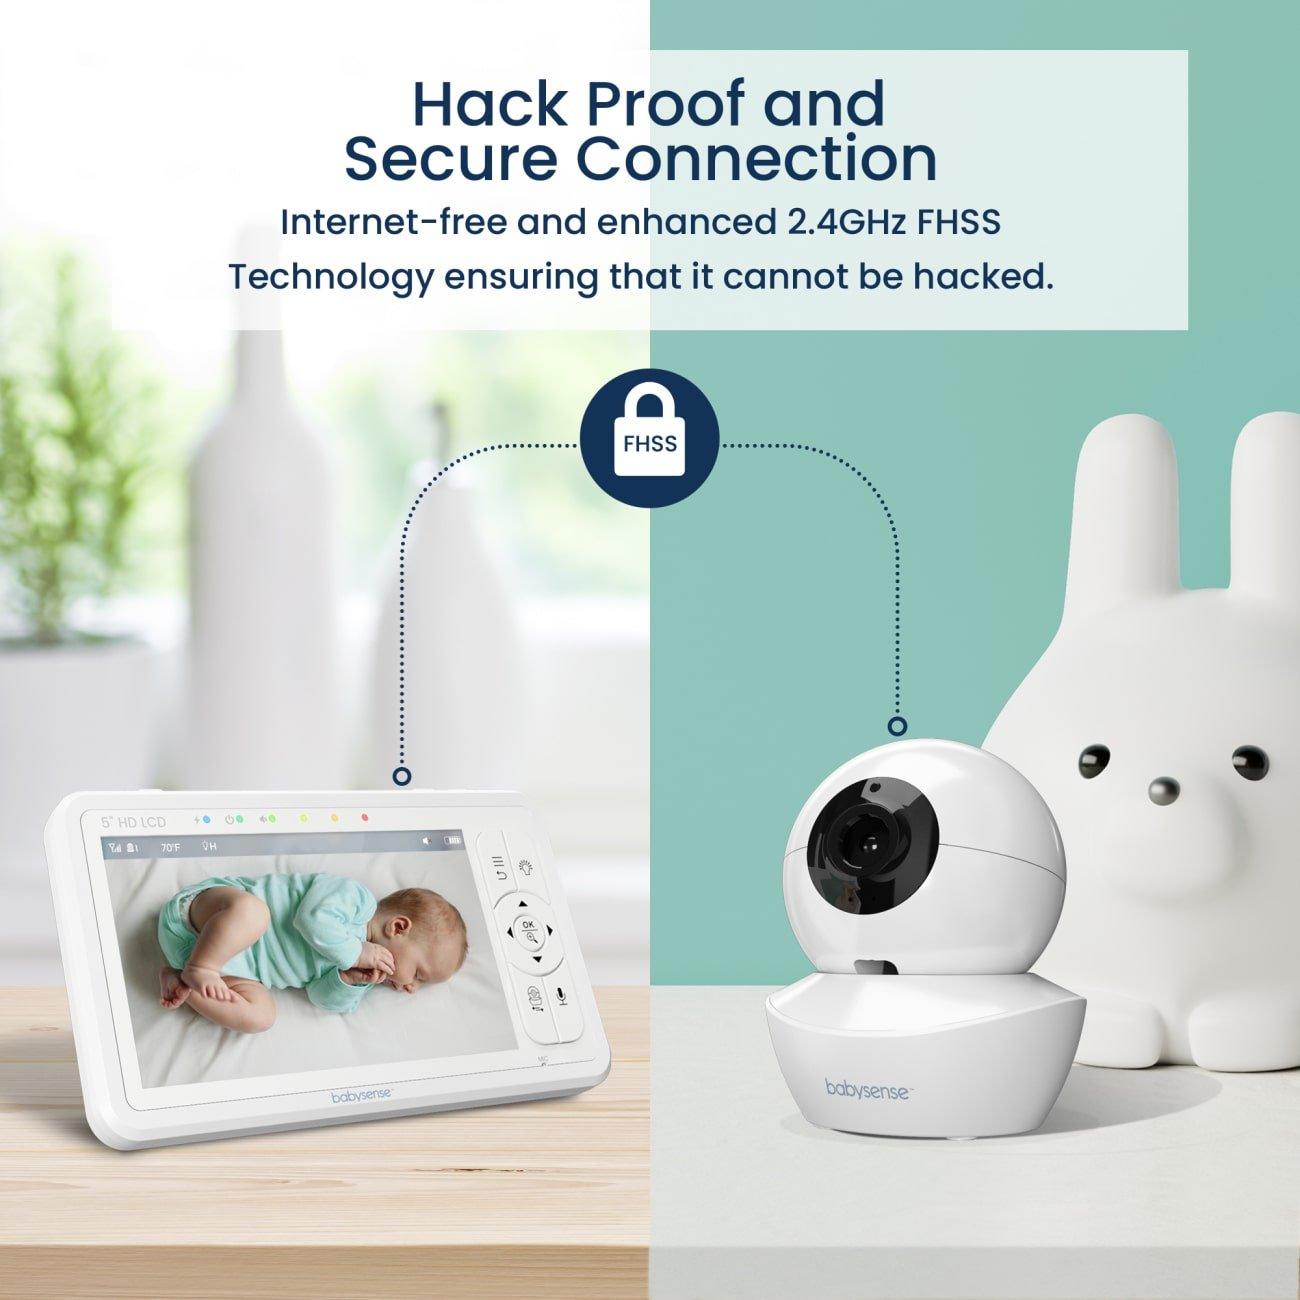 HDS2 - Video Baby Monitor with HD Cameras & Split Screen, NEW!